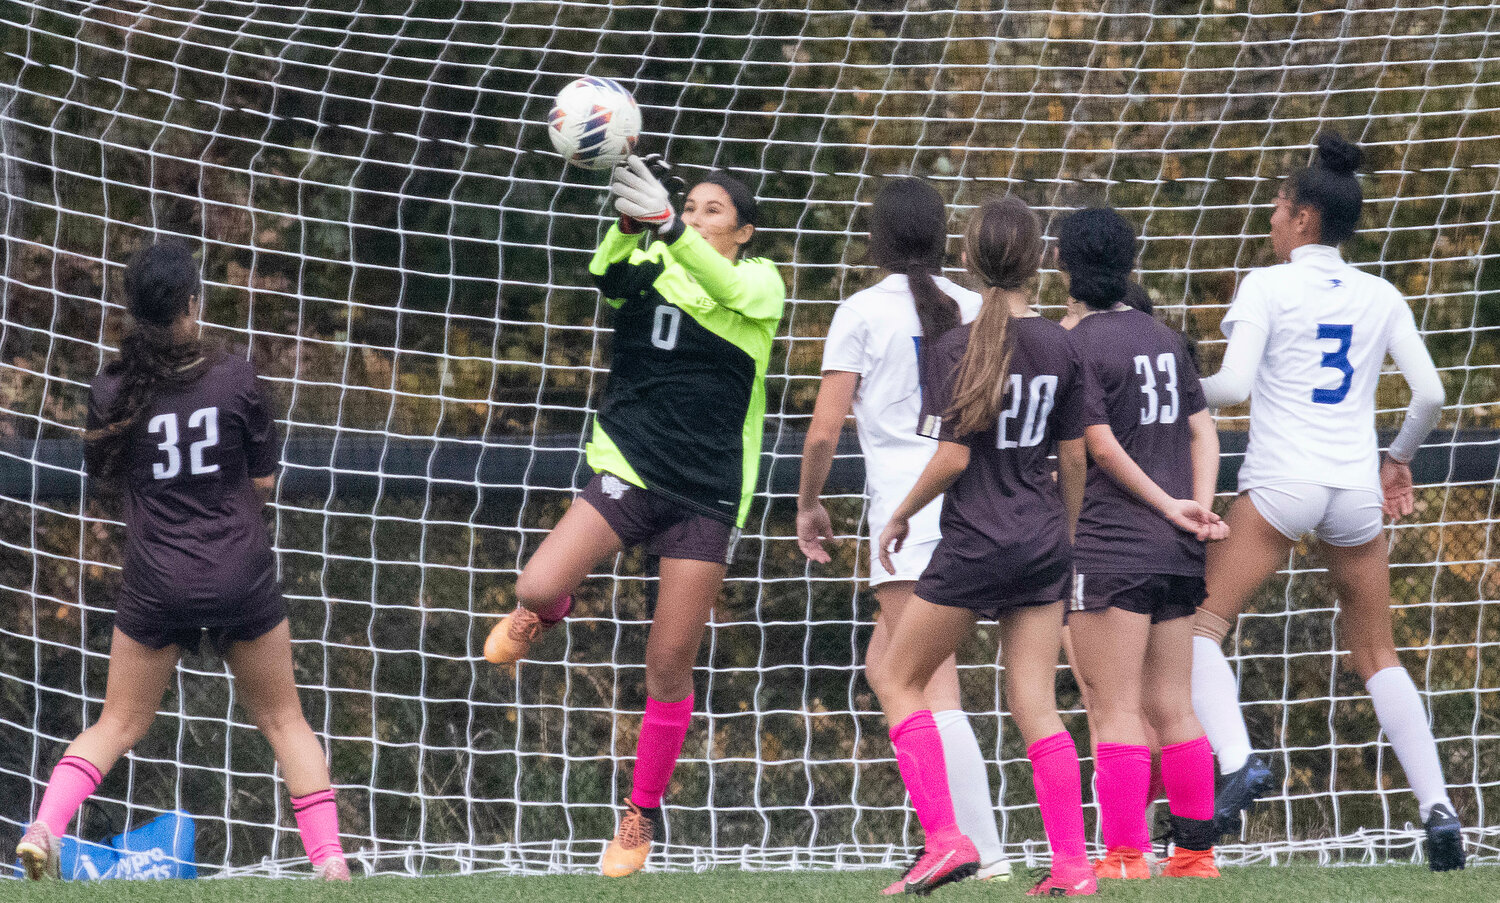 Goalkeeper Morgan Pacheco makes a save during the game.